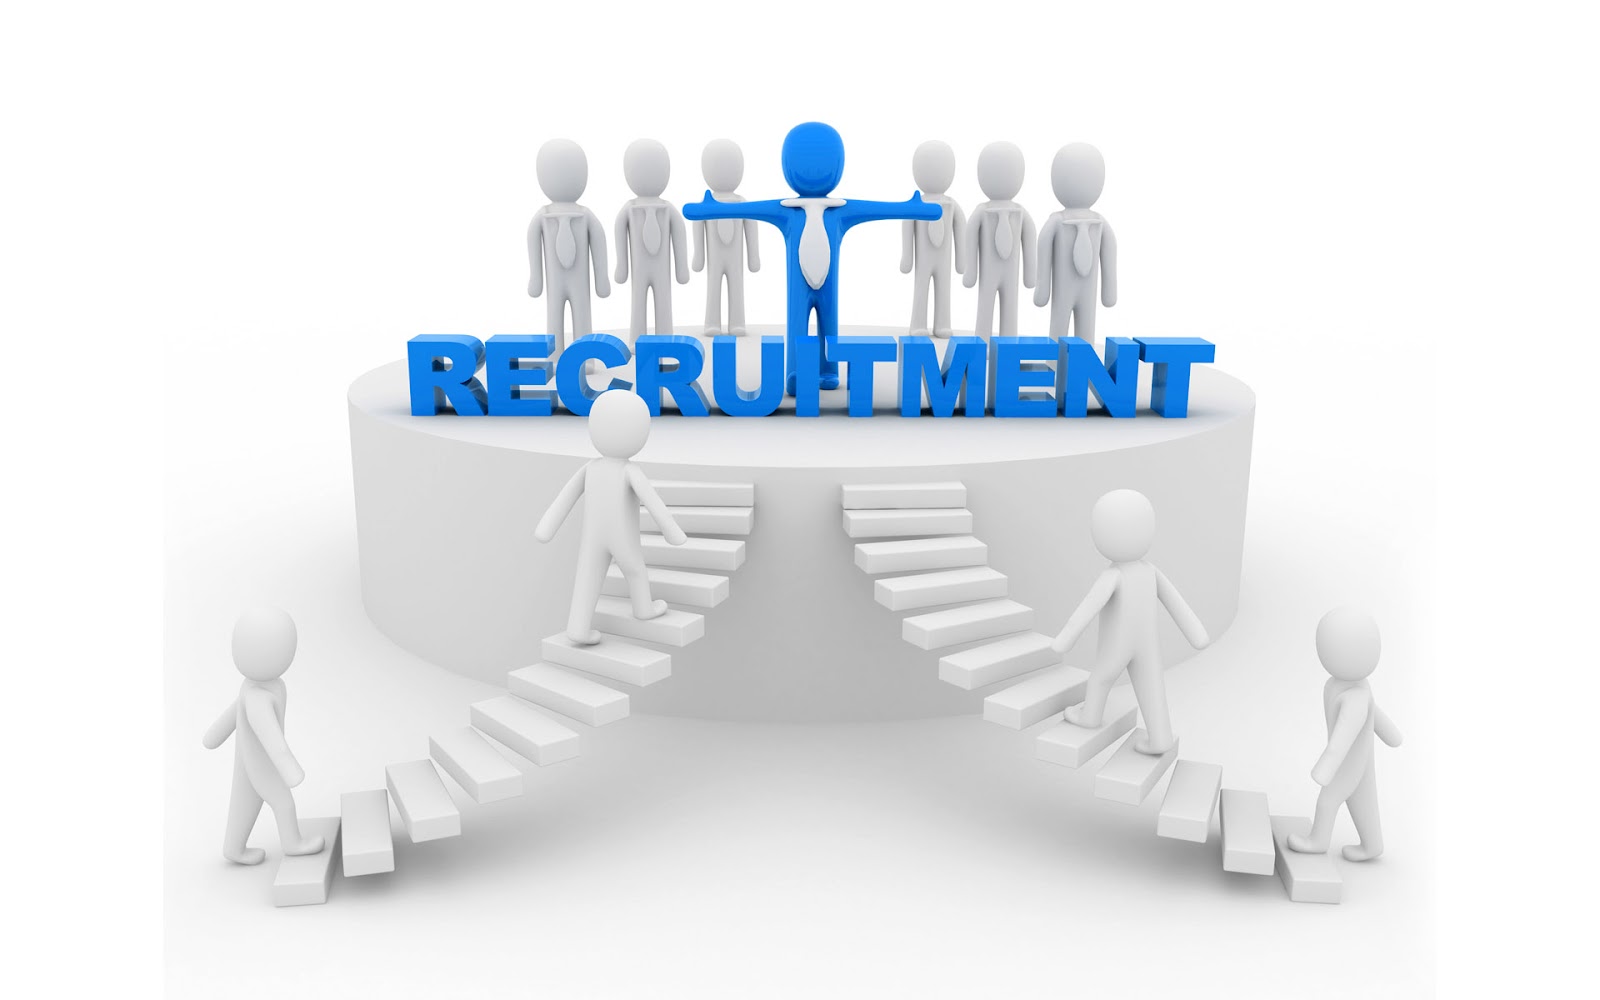 Some must-know information about recruitment consulting companies